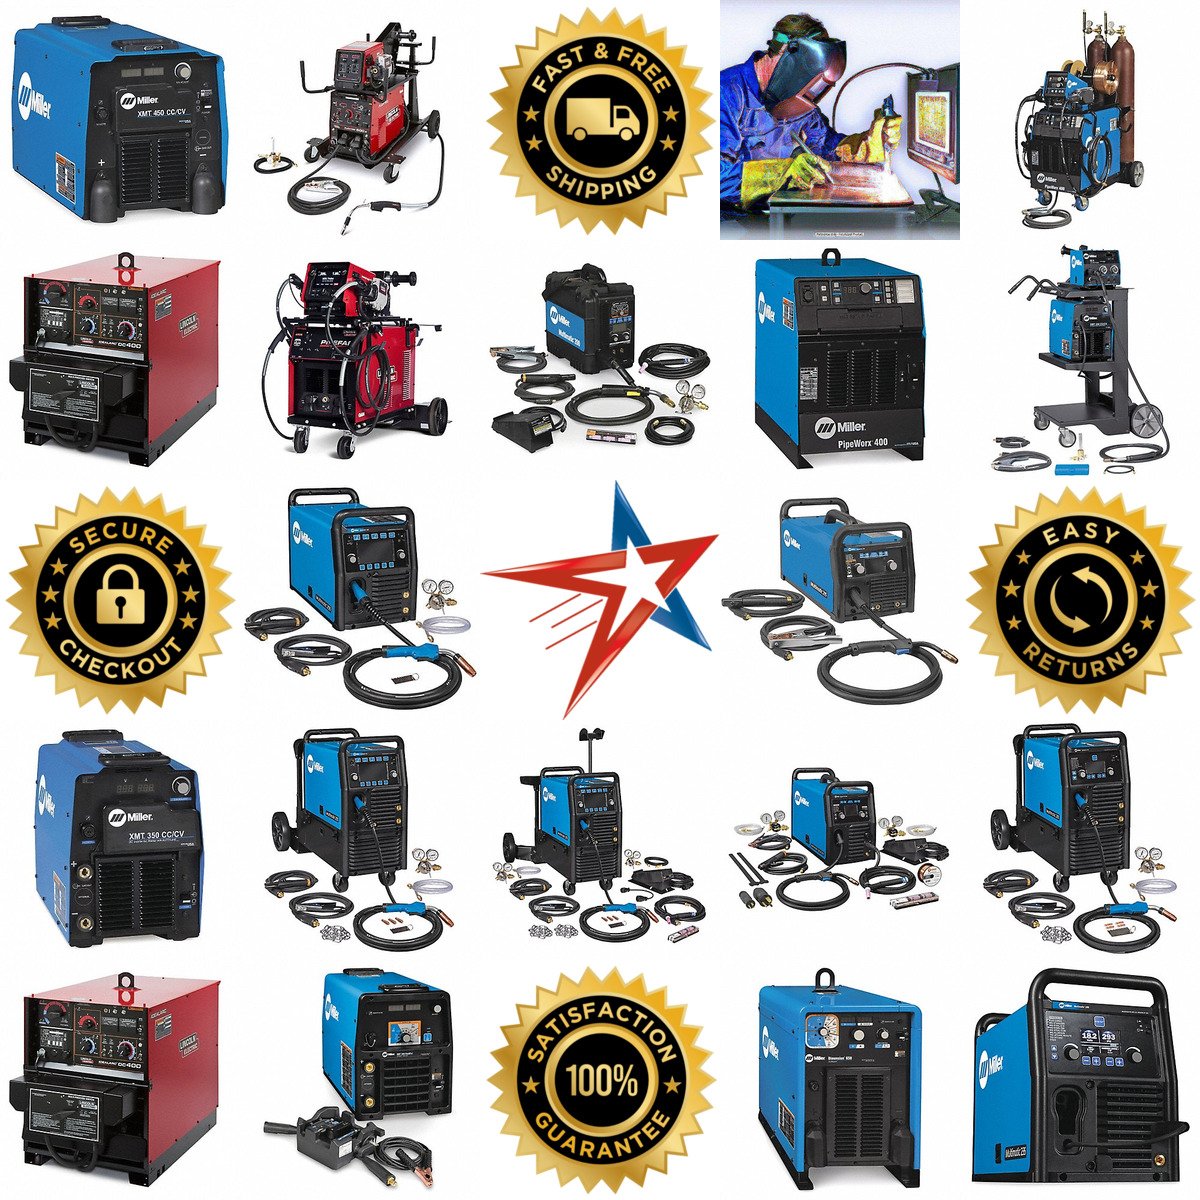 A selection of Multiprocess Welders products on GoVets